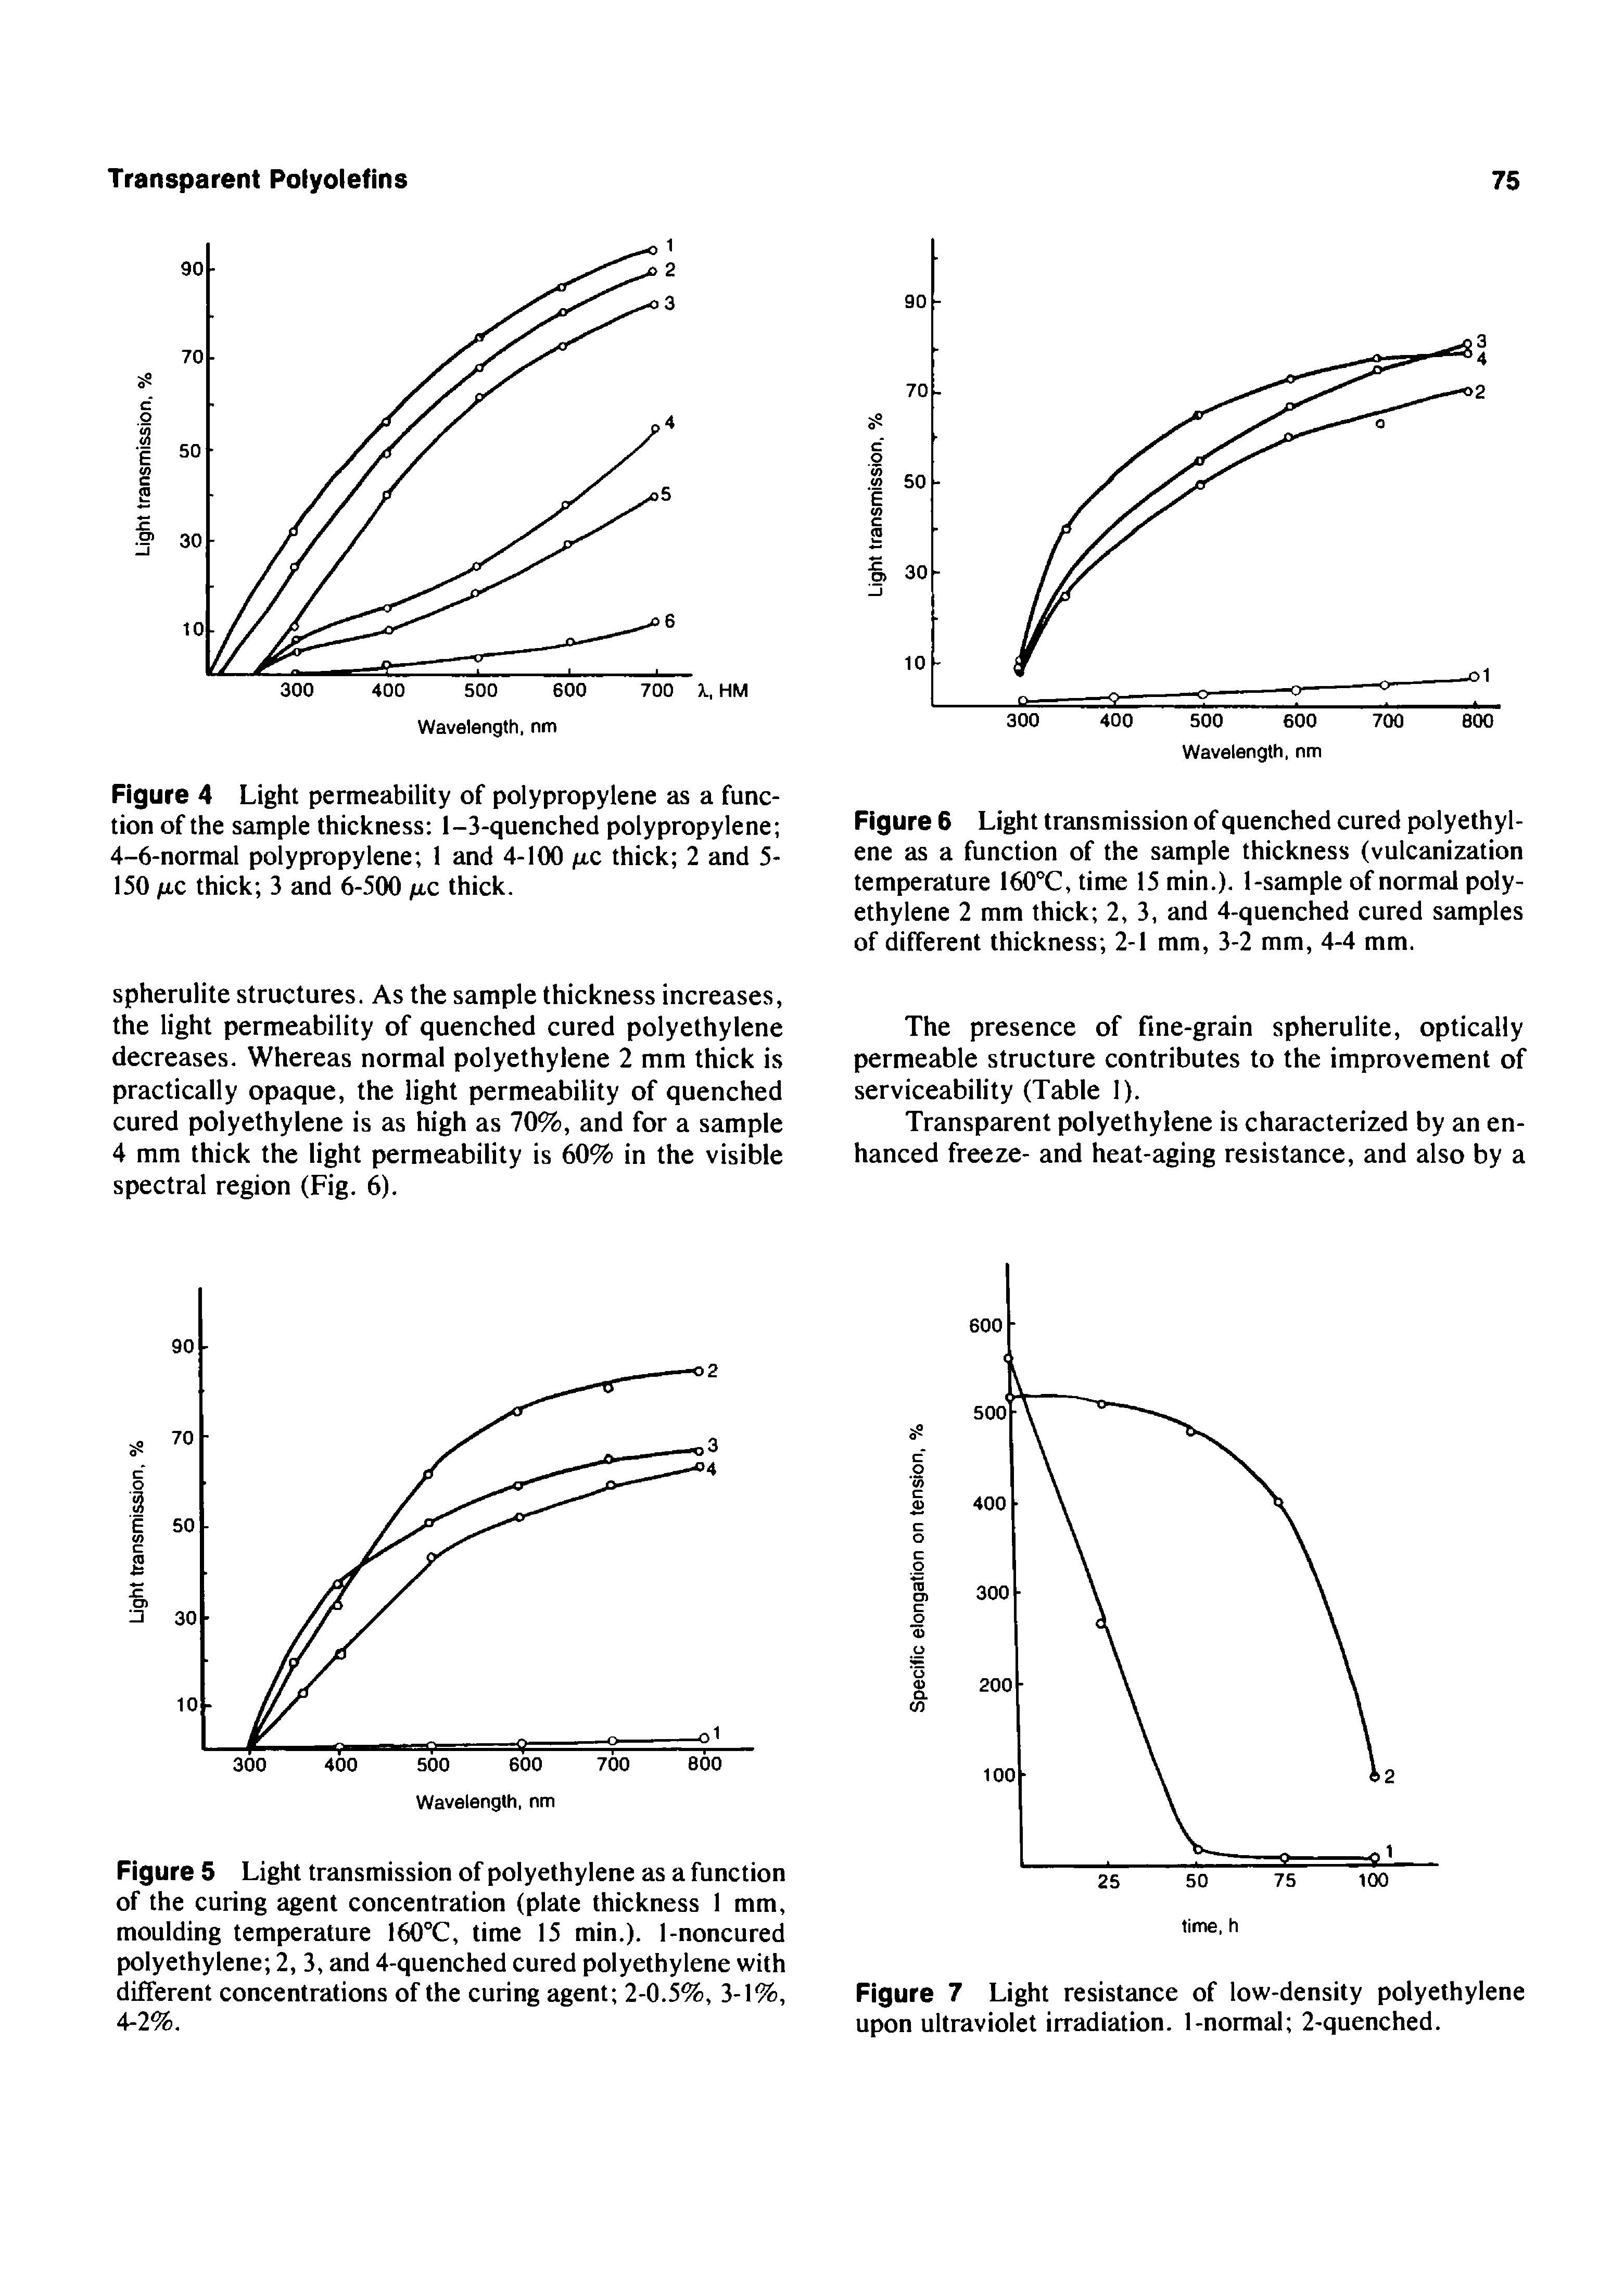 Figure 7 Light resistance of low-density polyethylene upon ultraviolet irradiation. 1-normal 2-quenched.